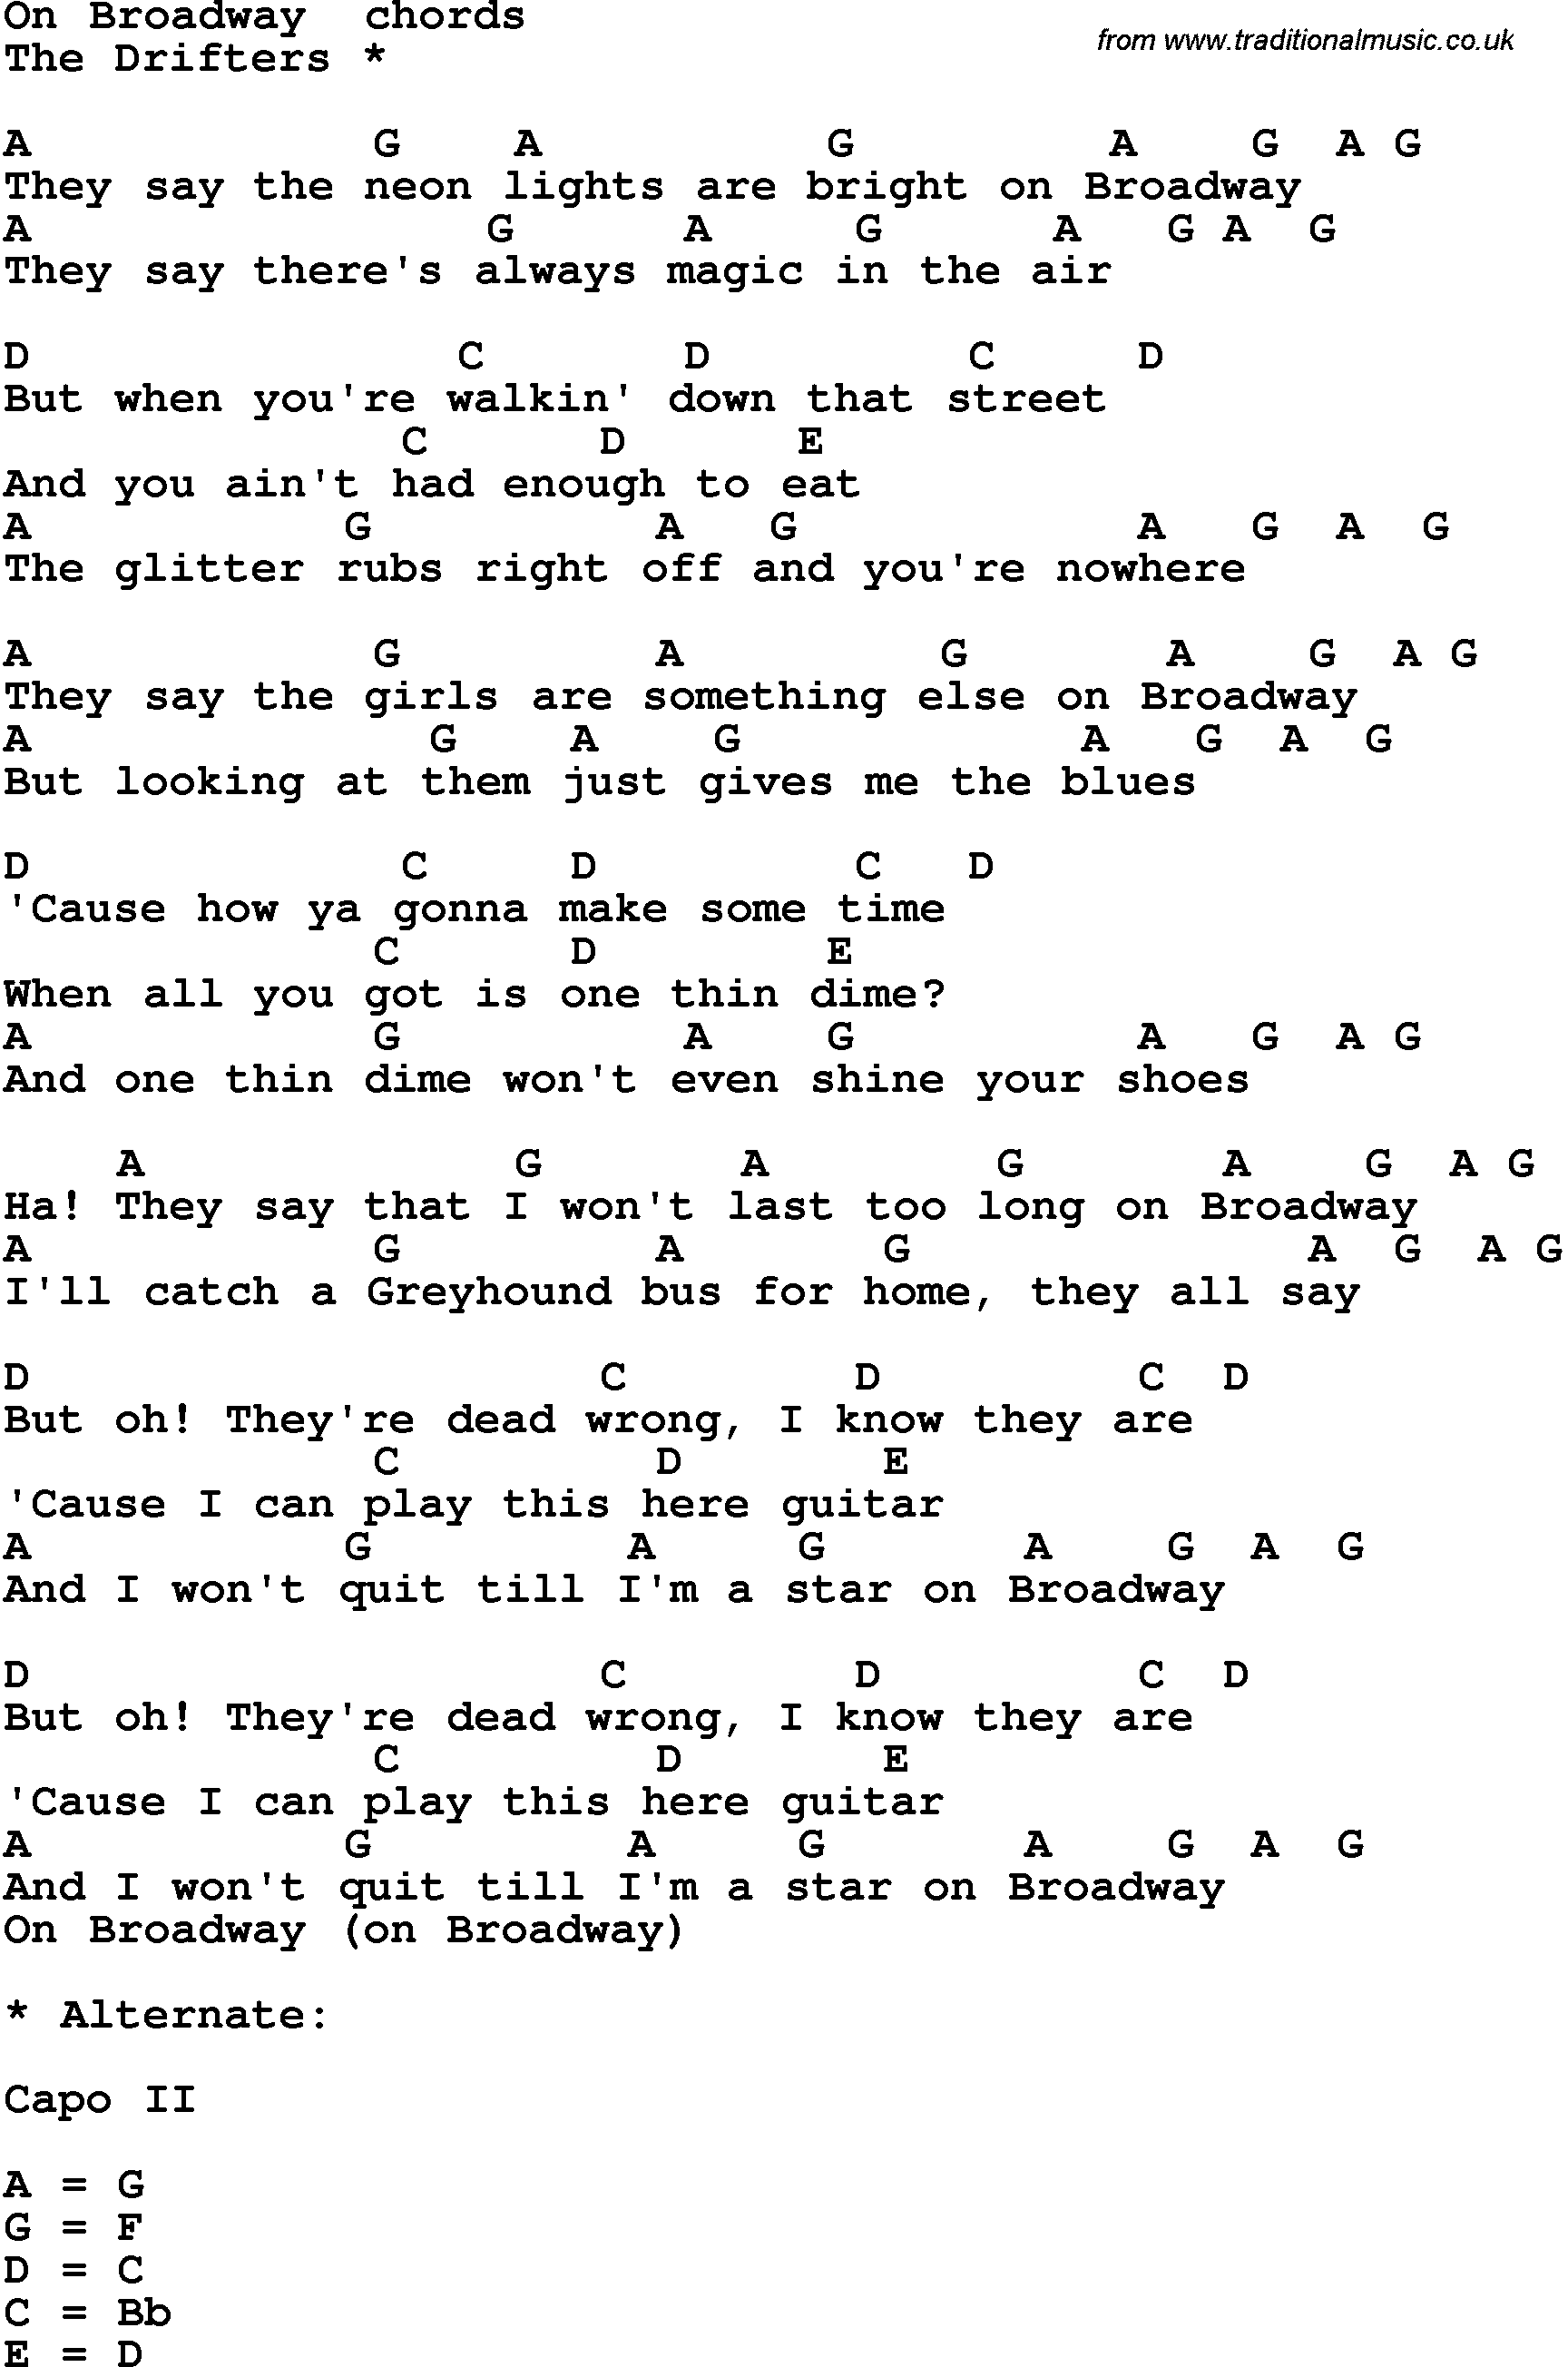 Song Lyrics with guitar chords for On Broadway